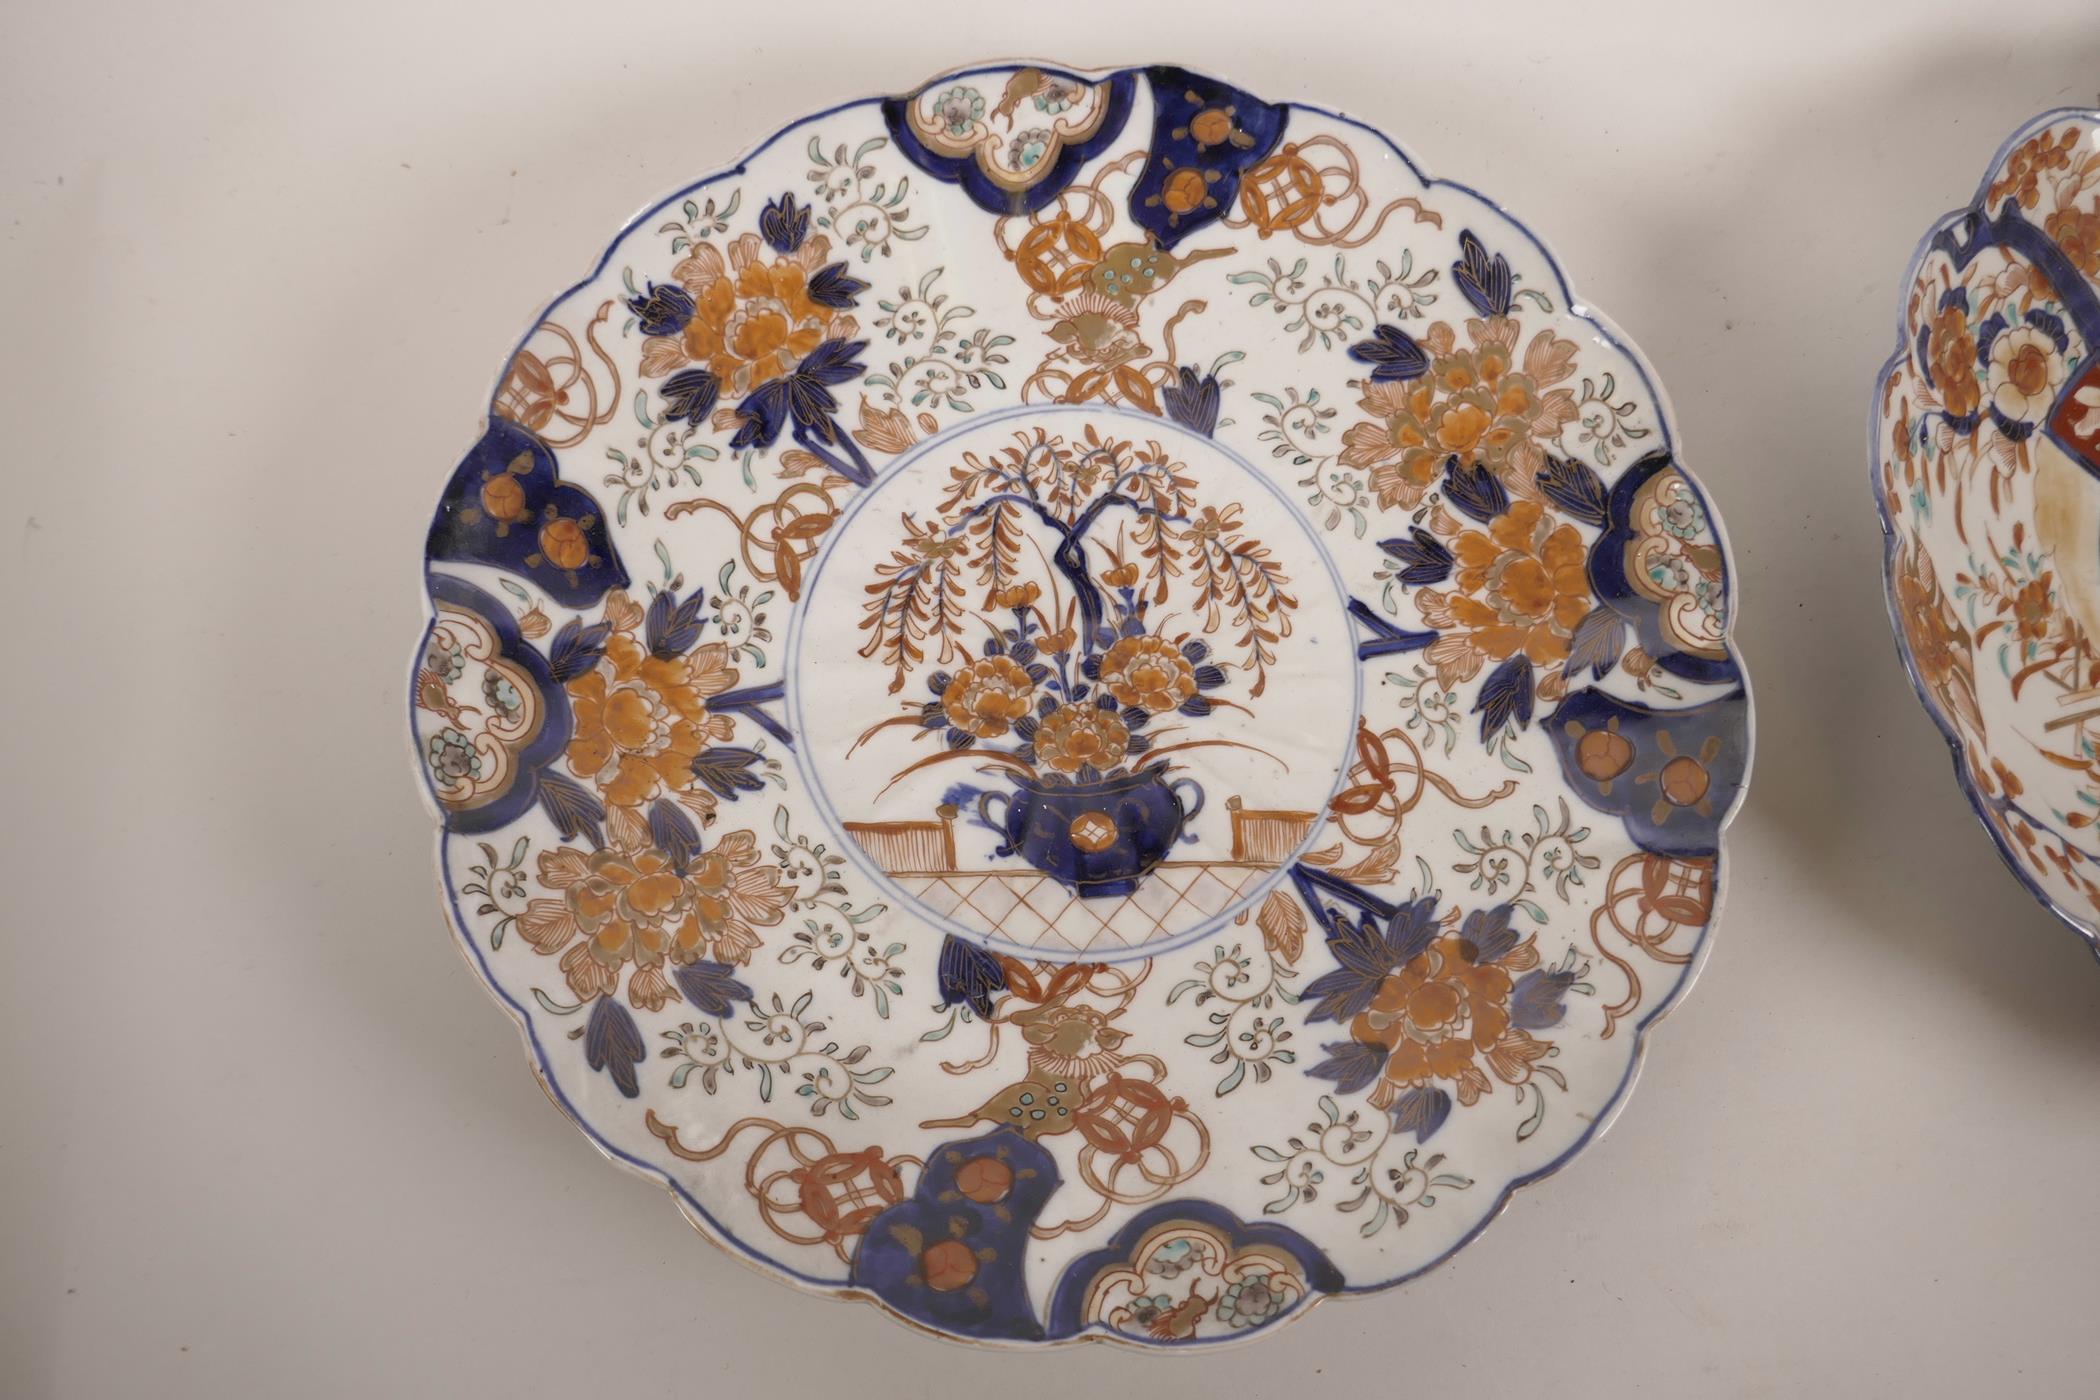 Two C19th Japanese Imari dishes, with shaped rims and lobed bodies, 12" diameter - Image 2 of 6